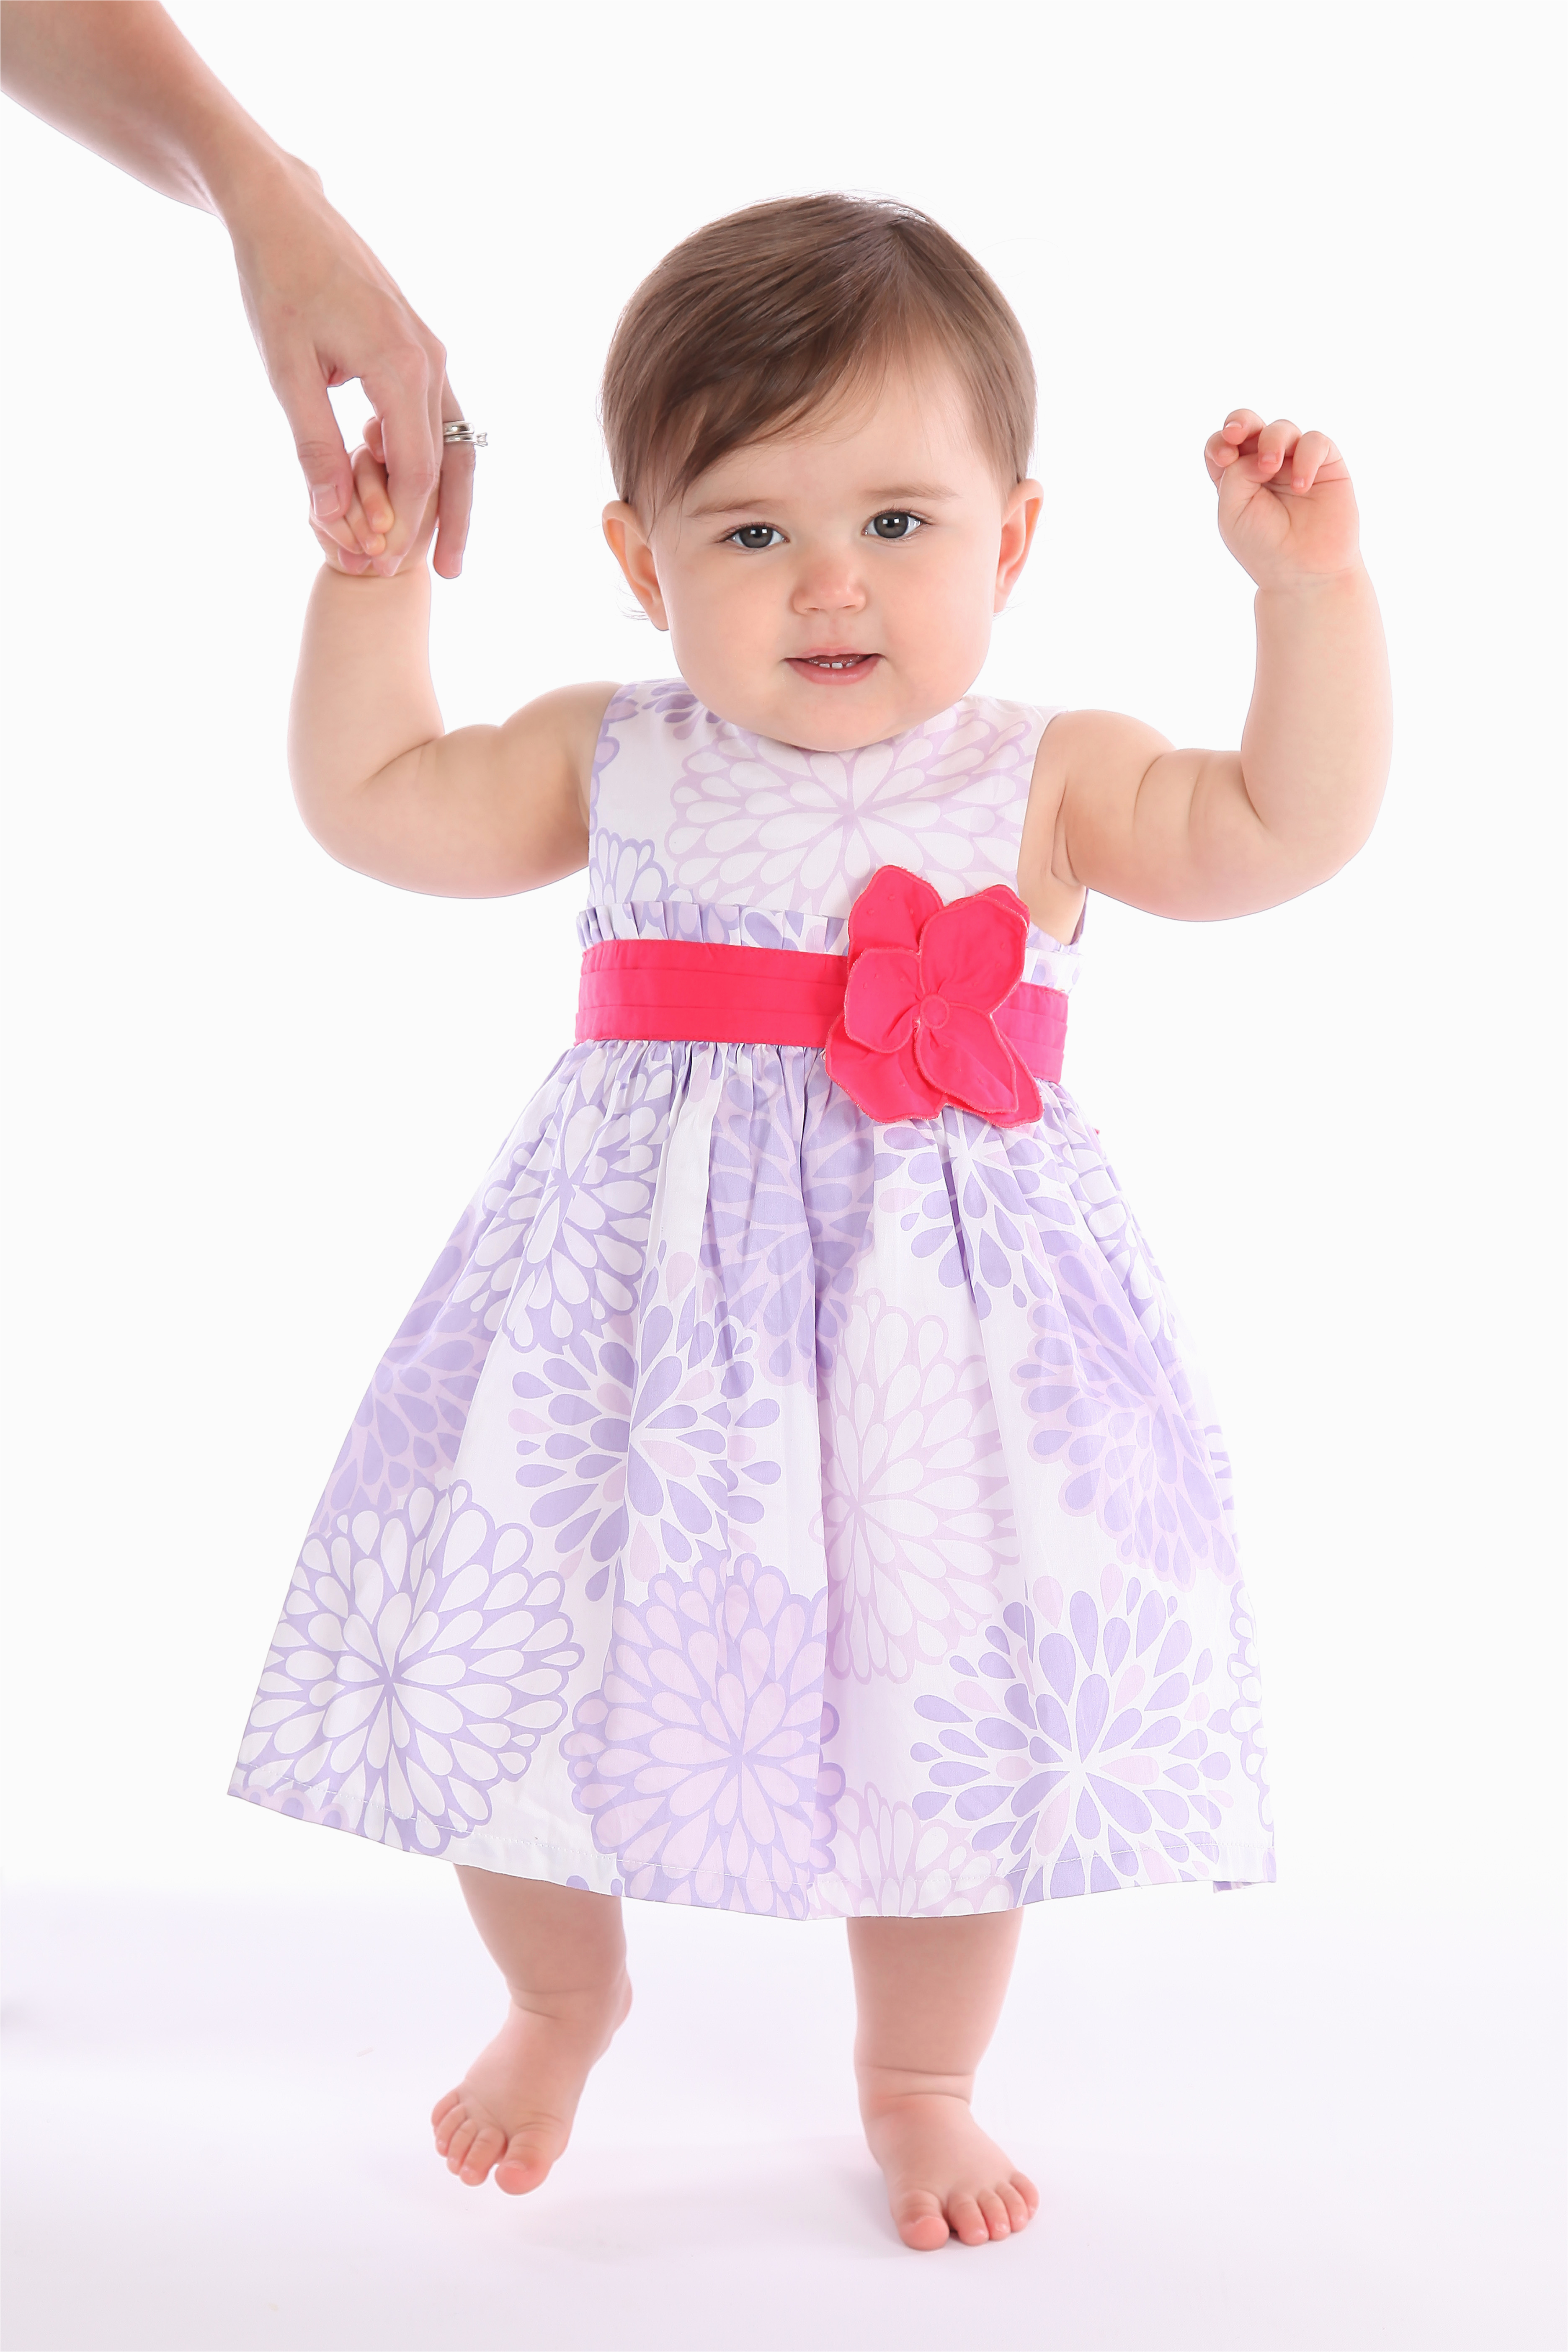 birthday dress for baby girl 1 year old hairstyle for